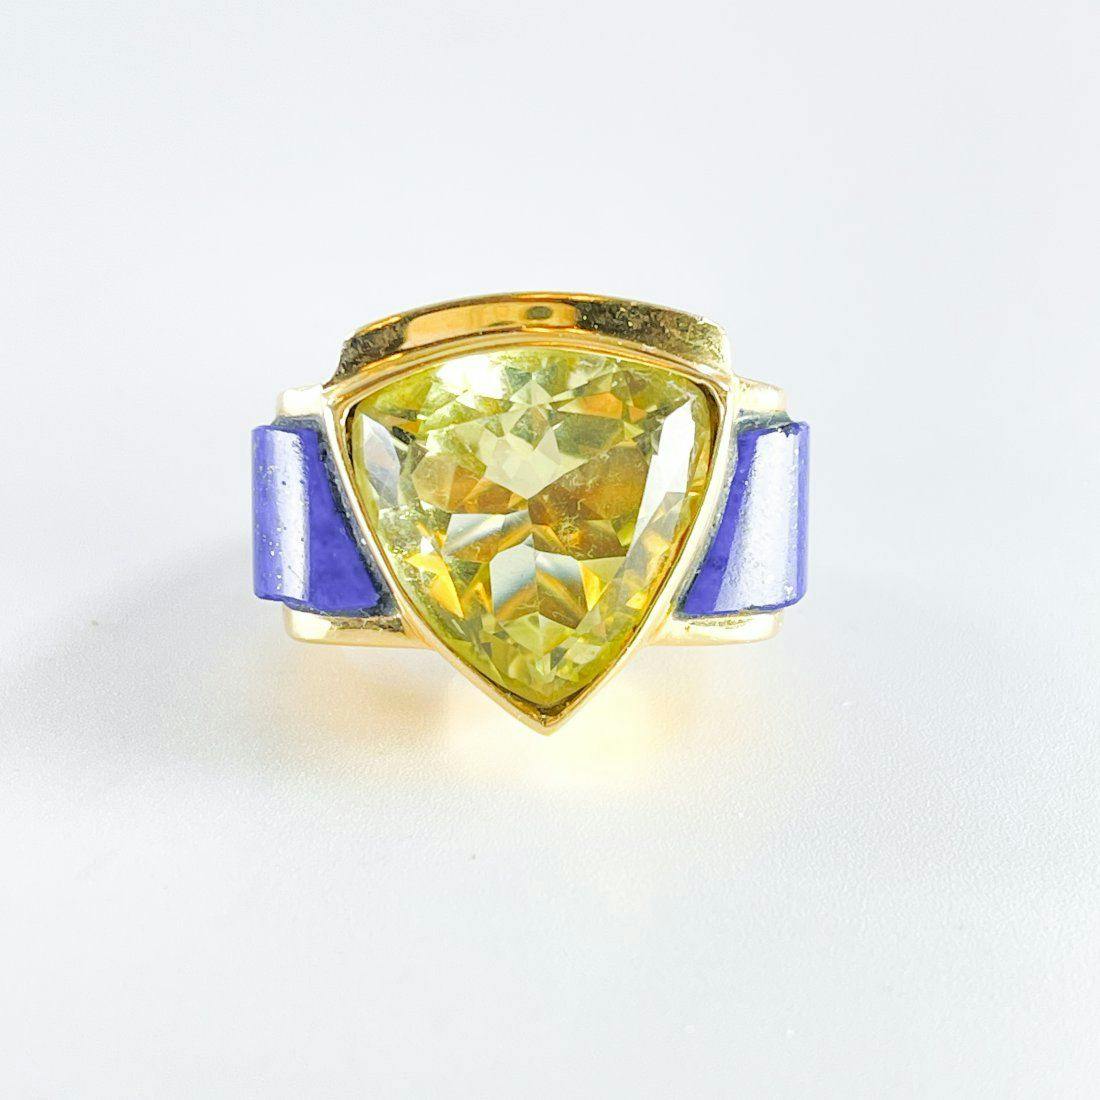 Is Golden Beryl a Good Gem Choice for Jewelry?